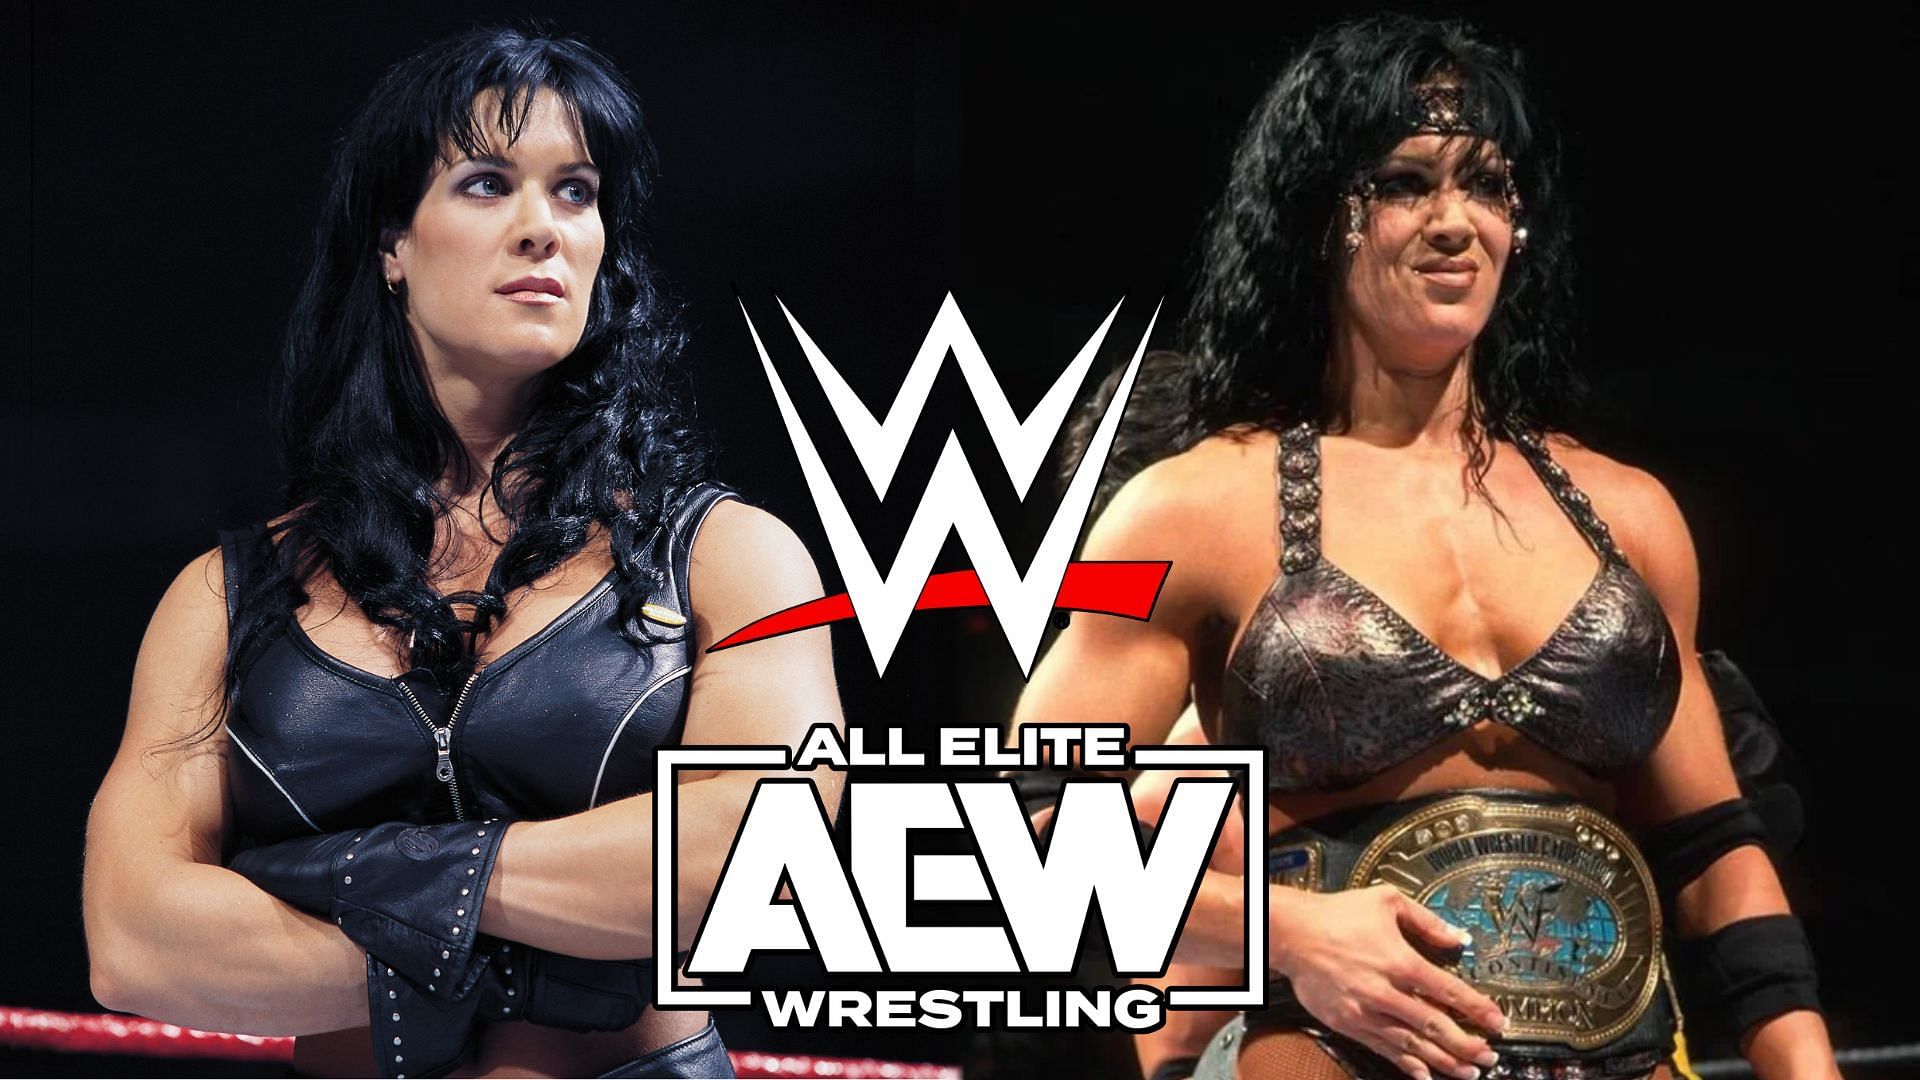 Could WWE have treated Chyna better before her tragic passing?